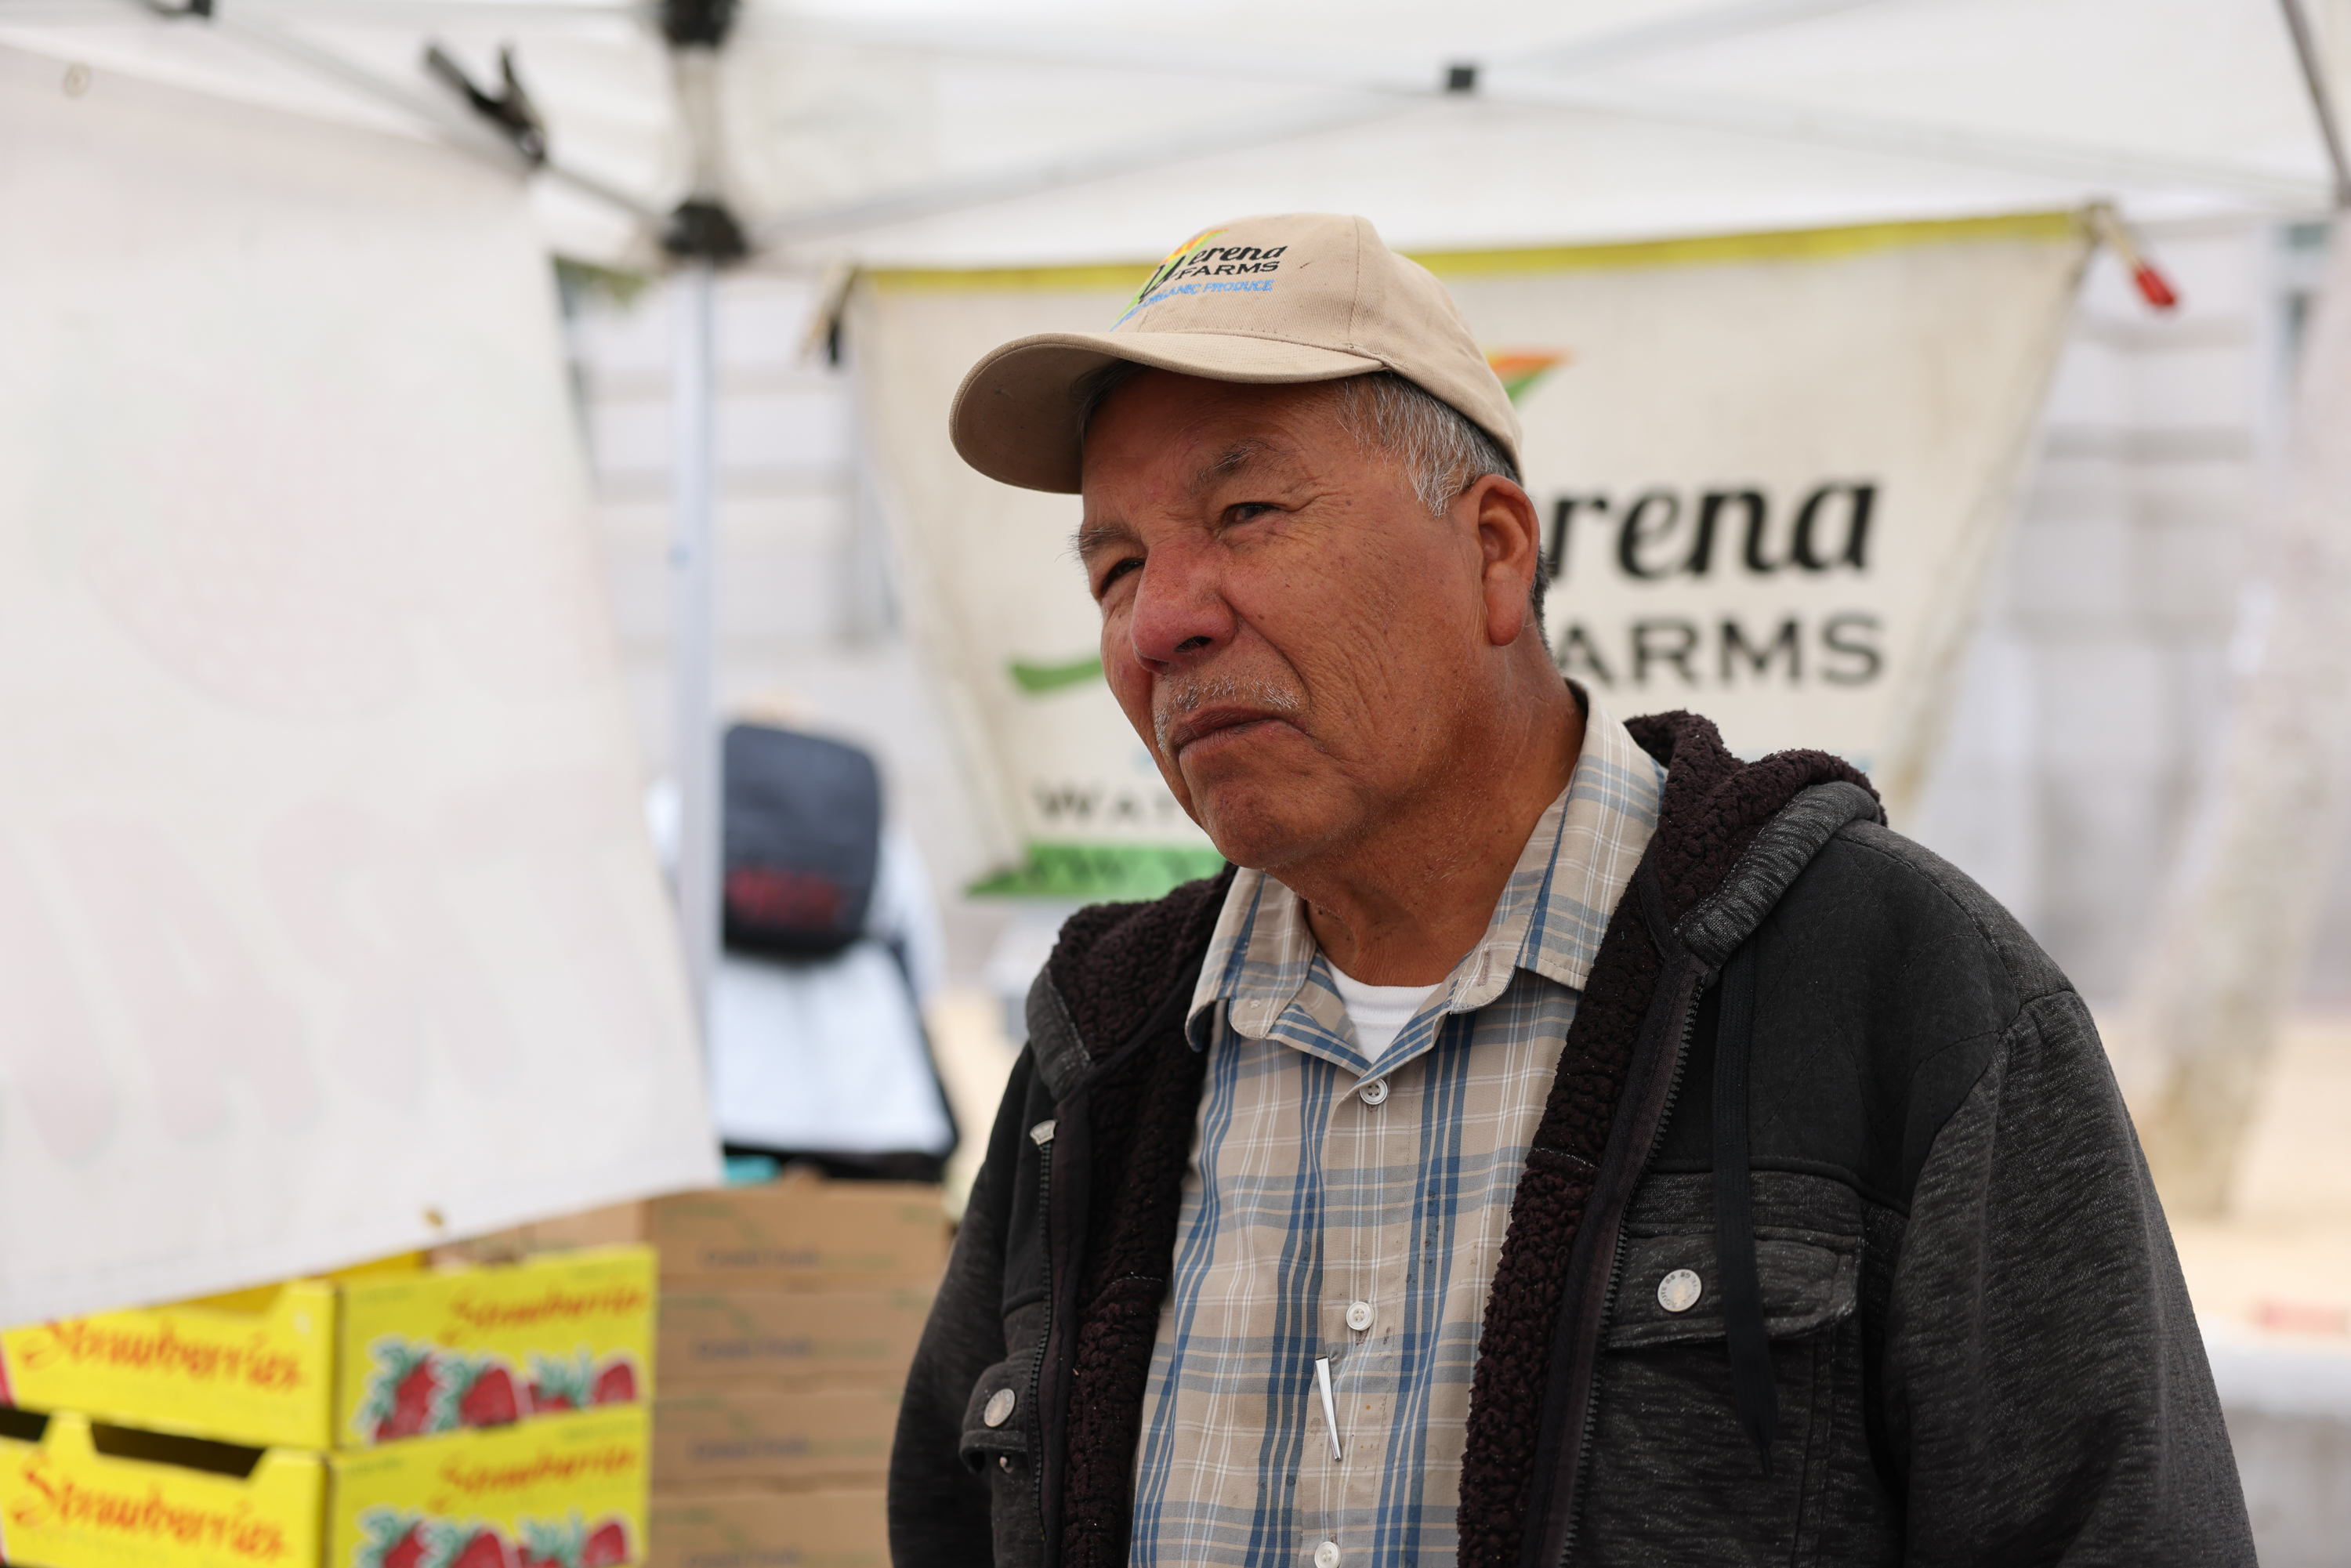 An older man wearing a cap and jacket stands in front of a tent with farm labels.